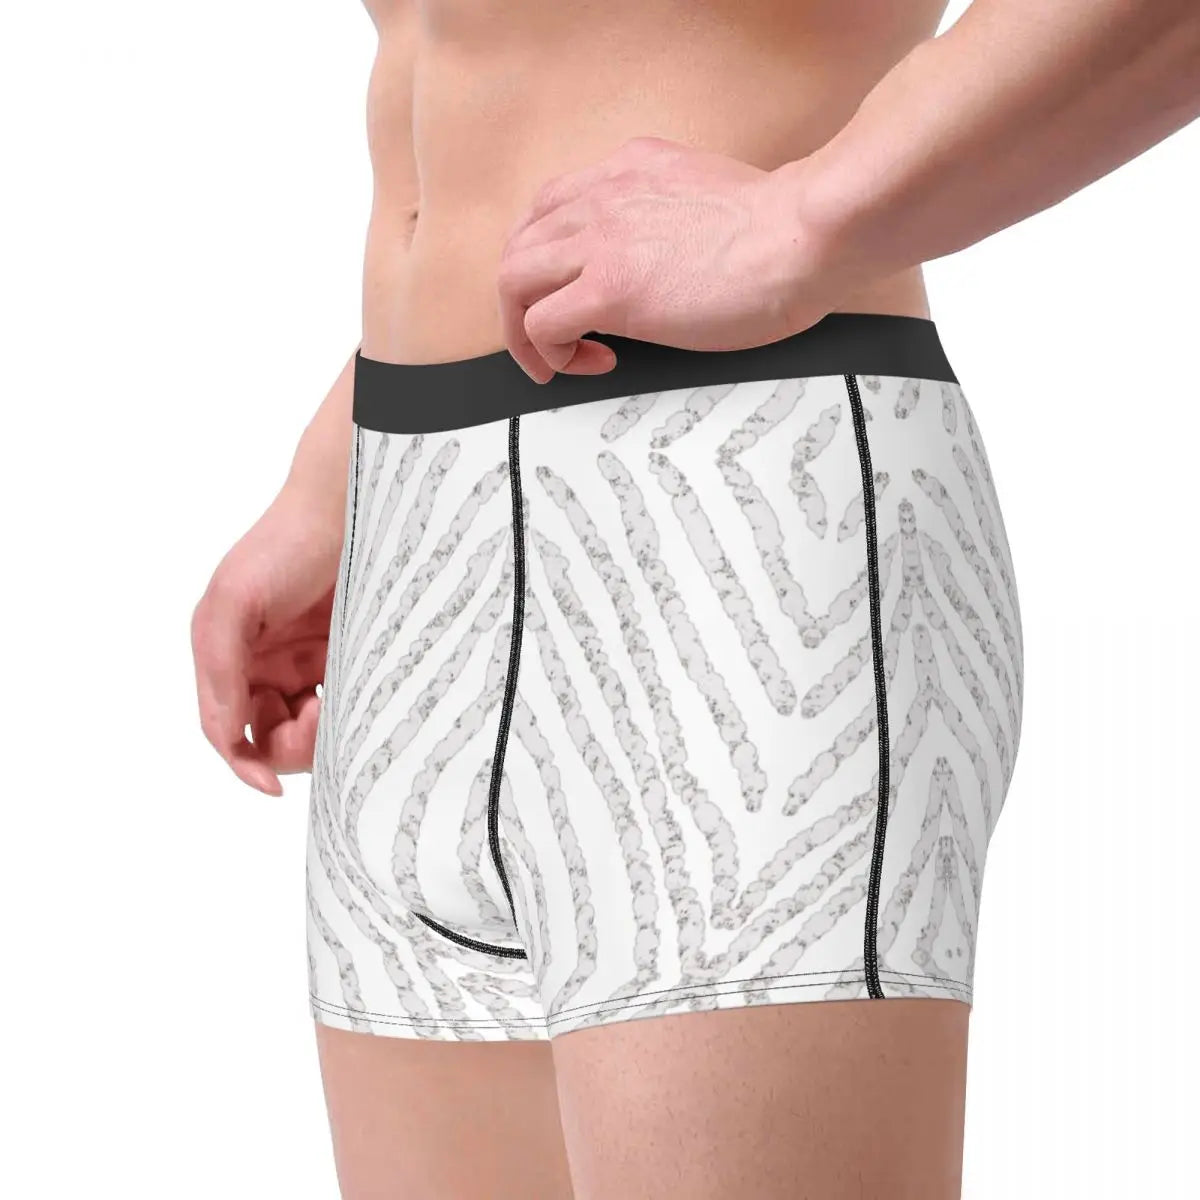 Undergarment Black And White Stripe Men's Boxer Briefs Funny Funny Novelty Autumn Wearable